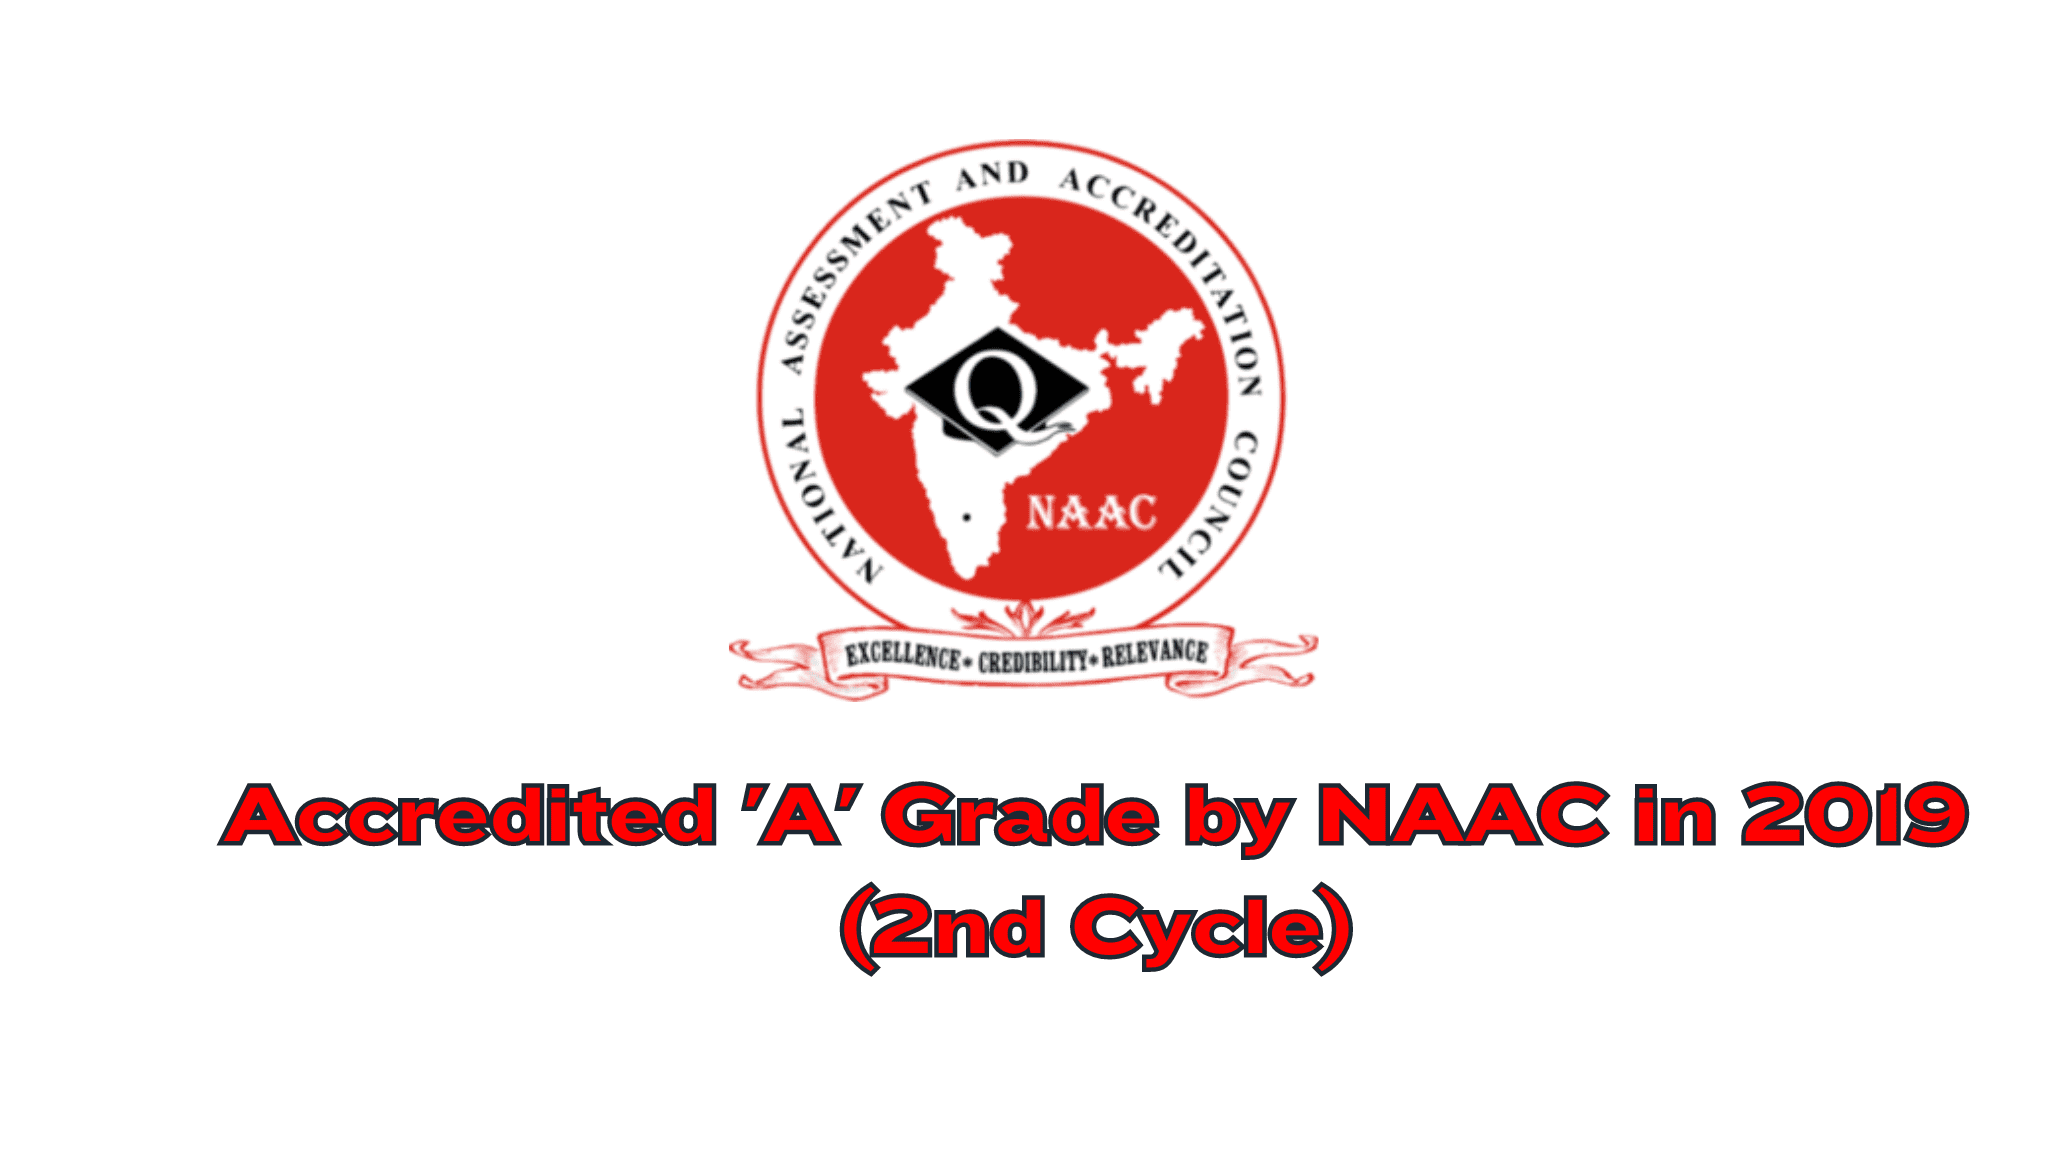 Accredited 'A' Grade by NAAC